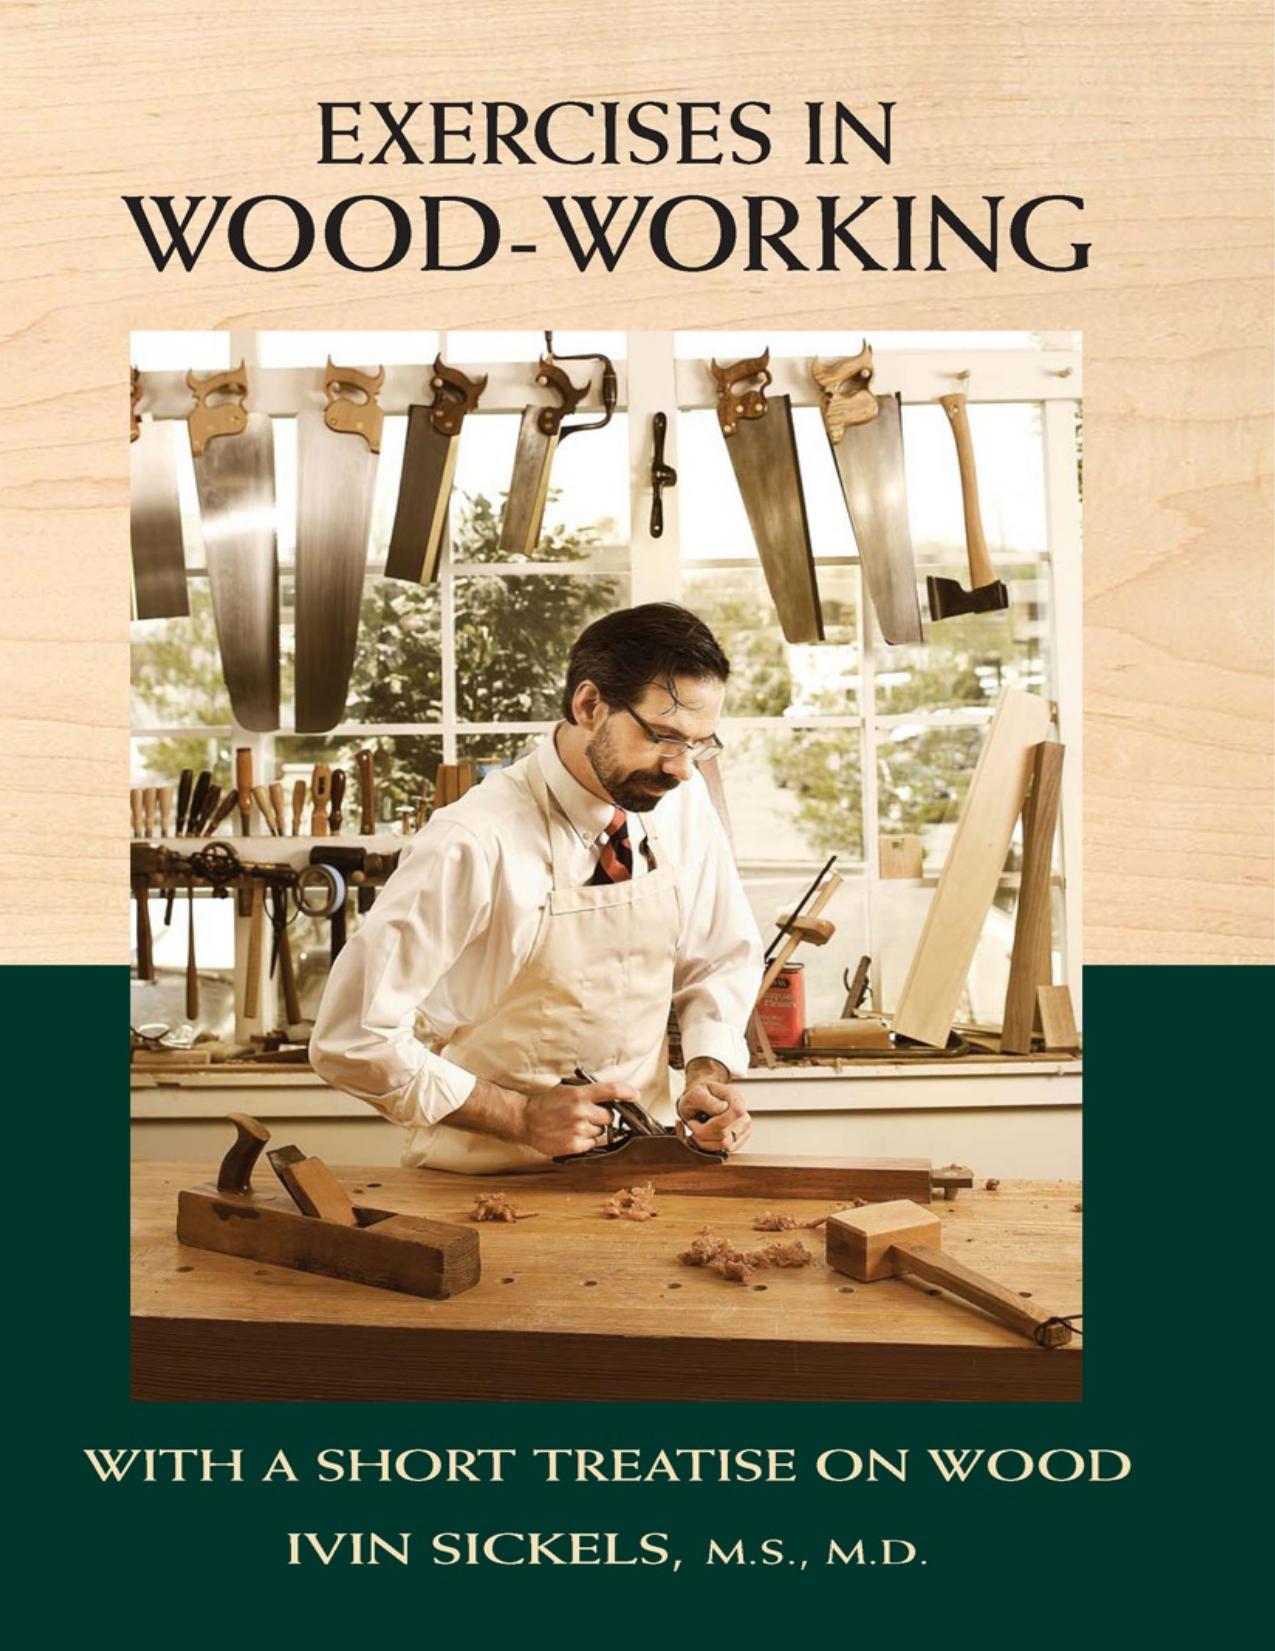 Exercises in Wood-Working by Ivin Sickels